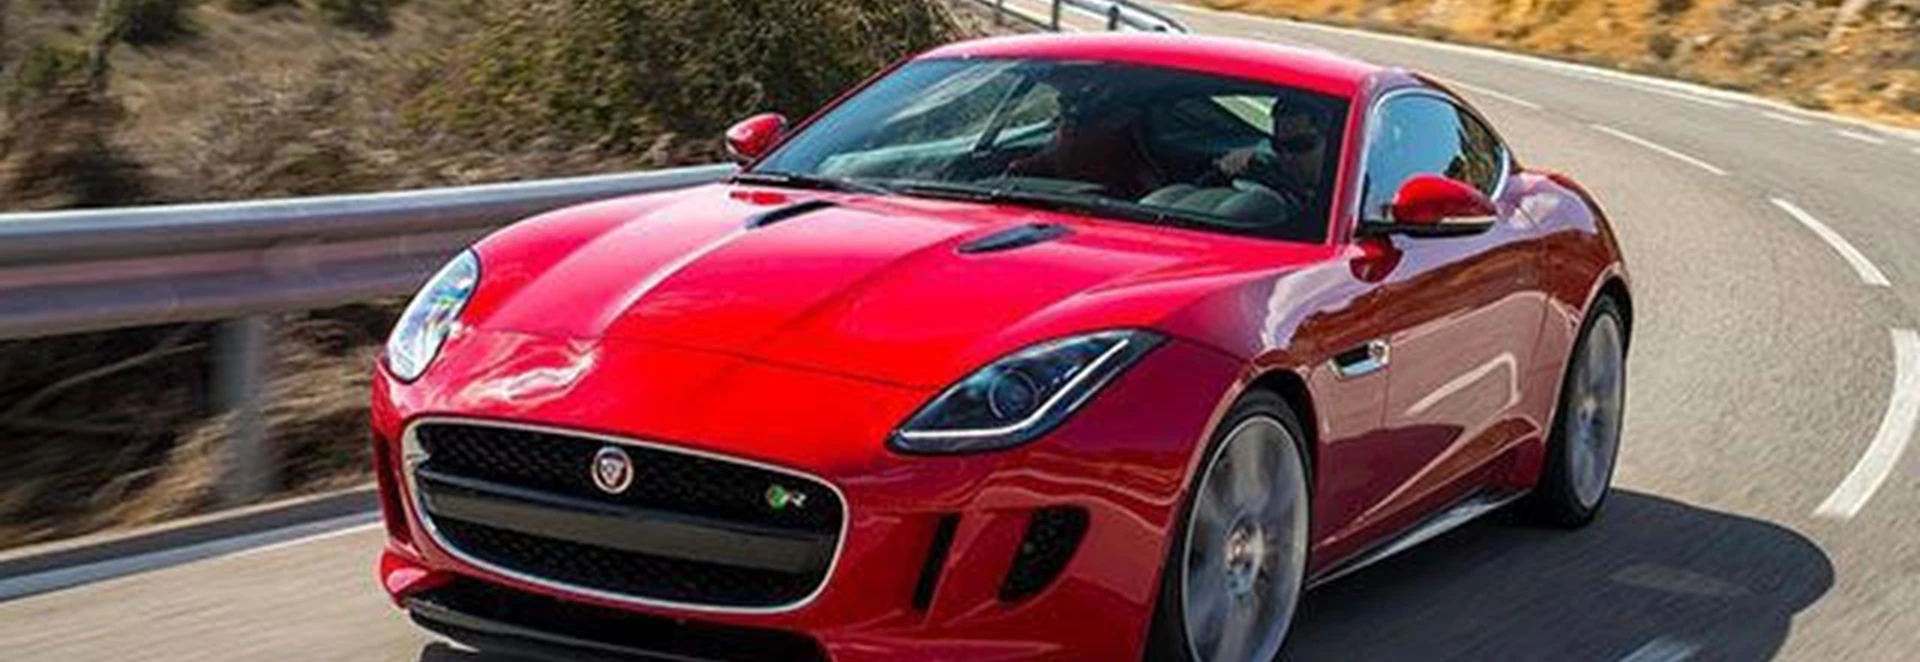 Jaguar files patents for three electric cars